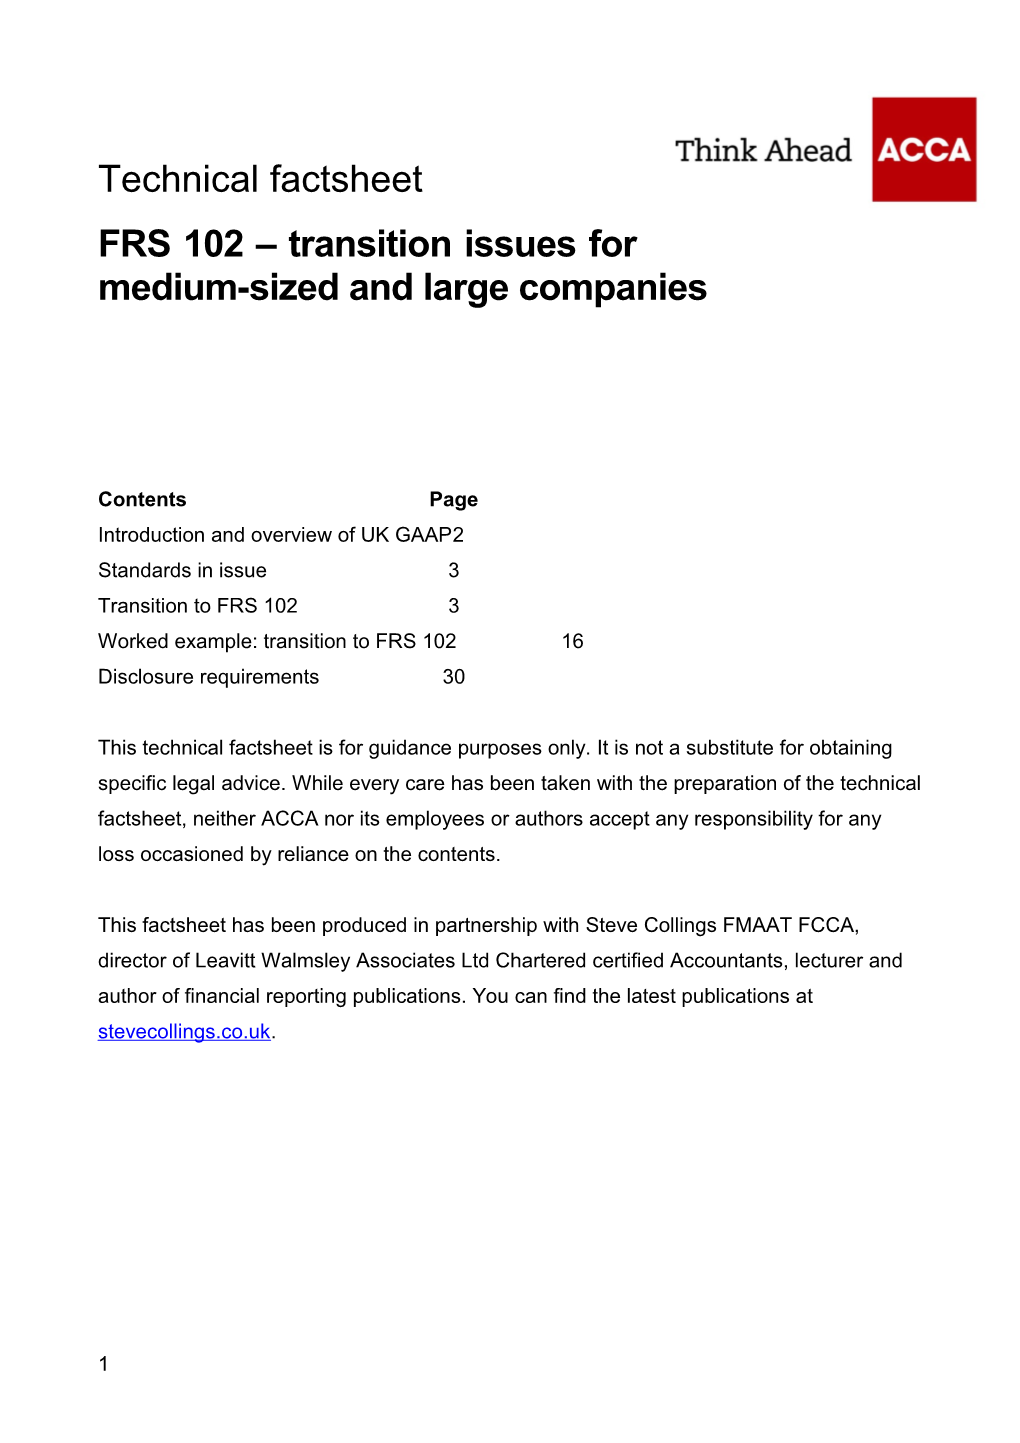 FRS 102 Transition Issues for Medium-Sized and Large Companies